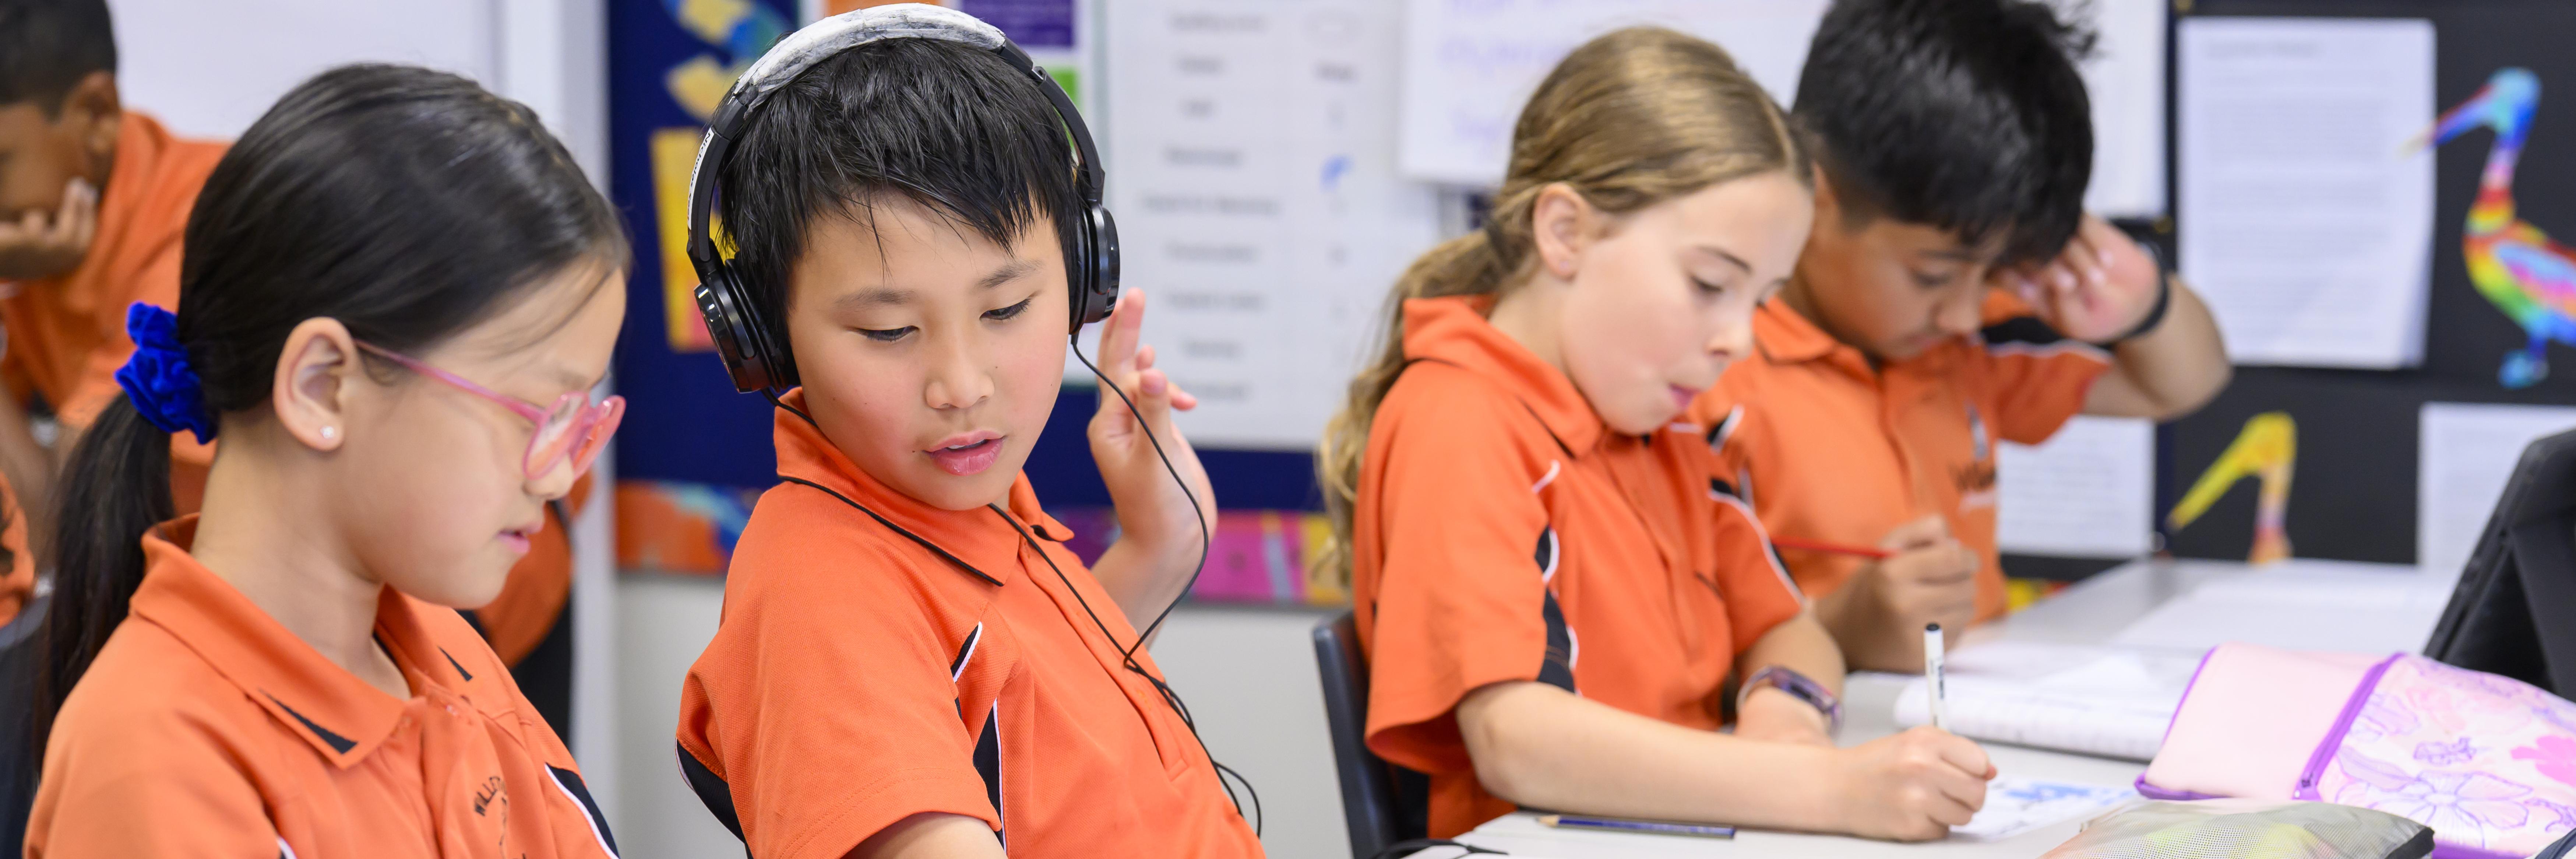 boy 1 with headphones on in center of image looking down towards Girl 1's work, talking to her. girl 2 and boy 2 in back of image out of focus, writing in their workbooks